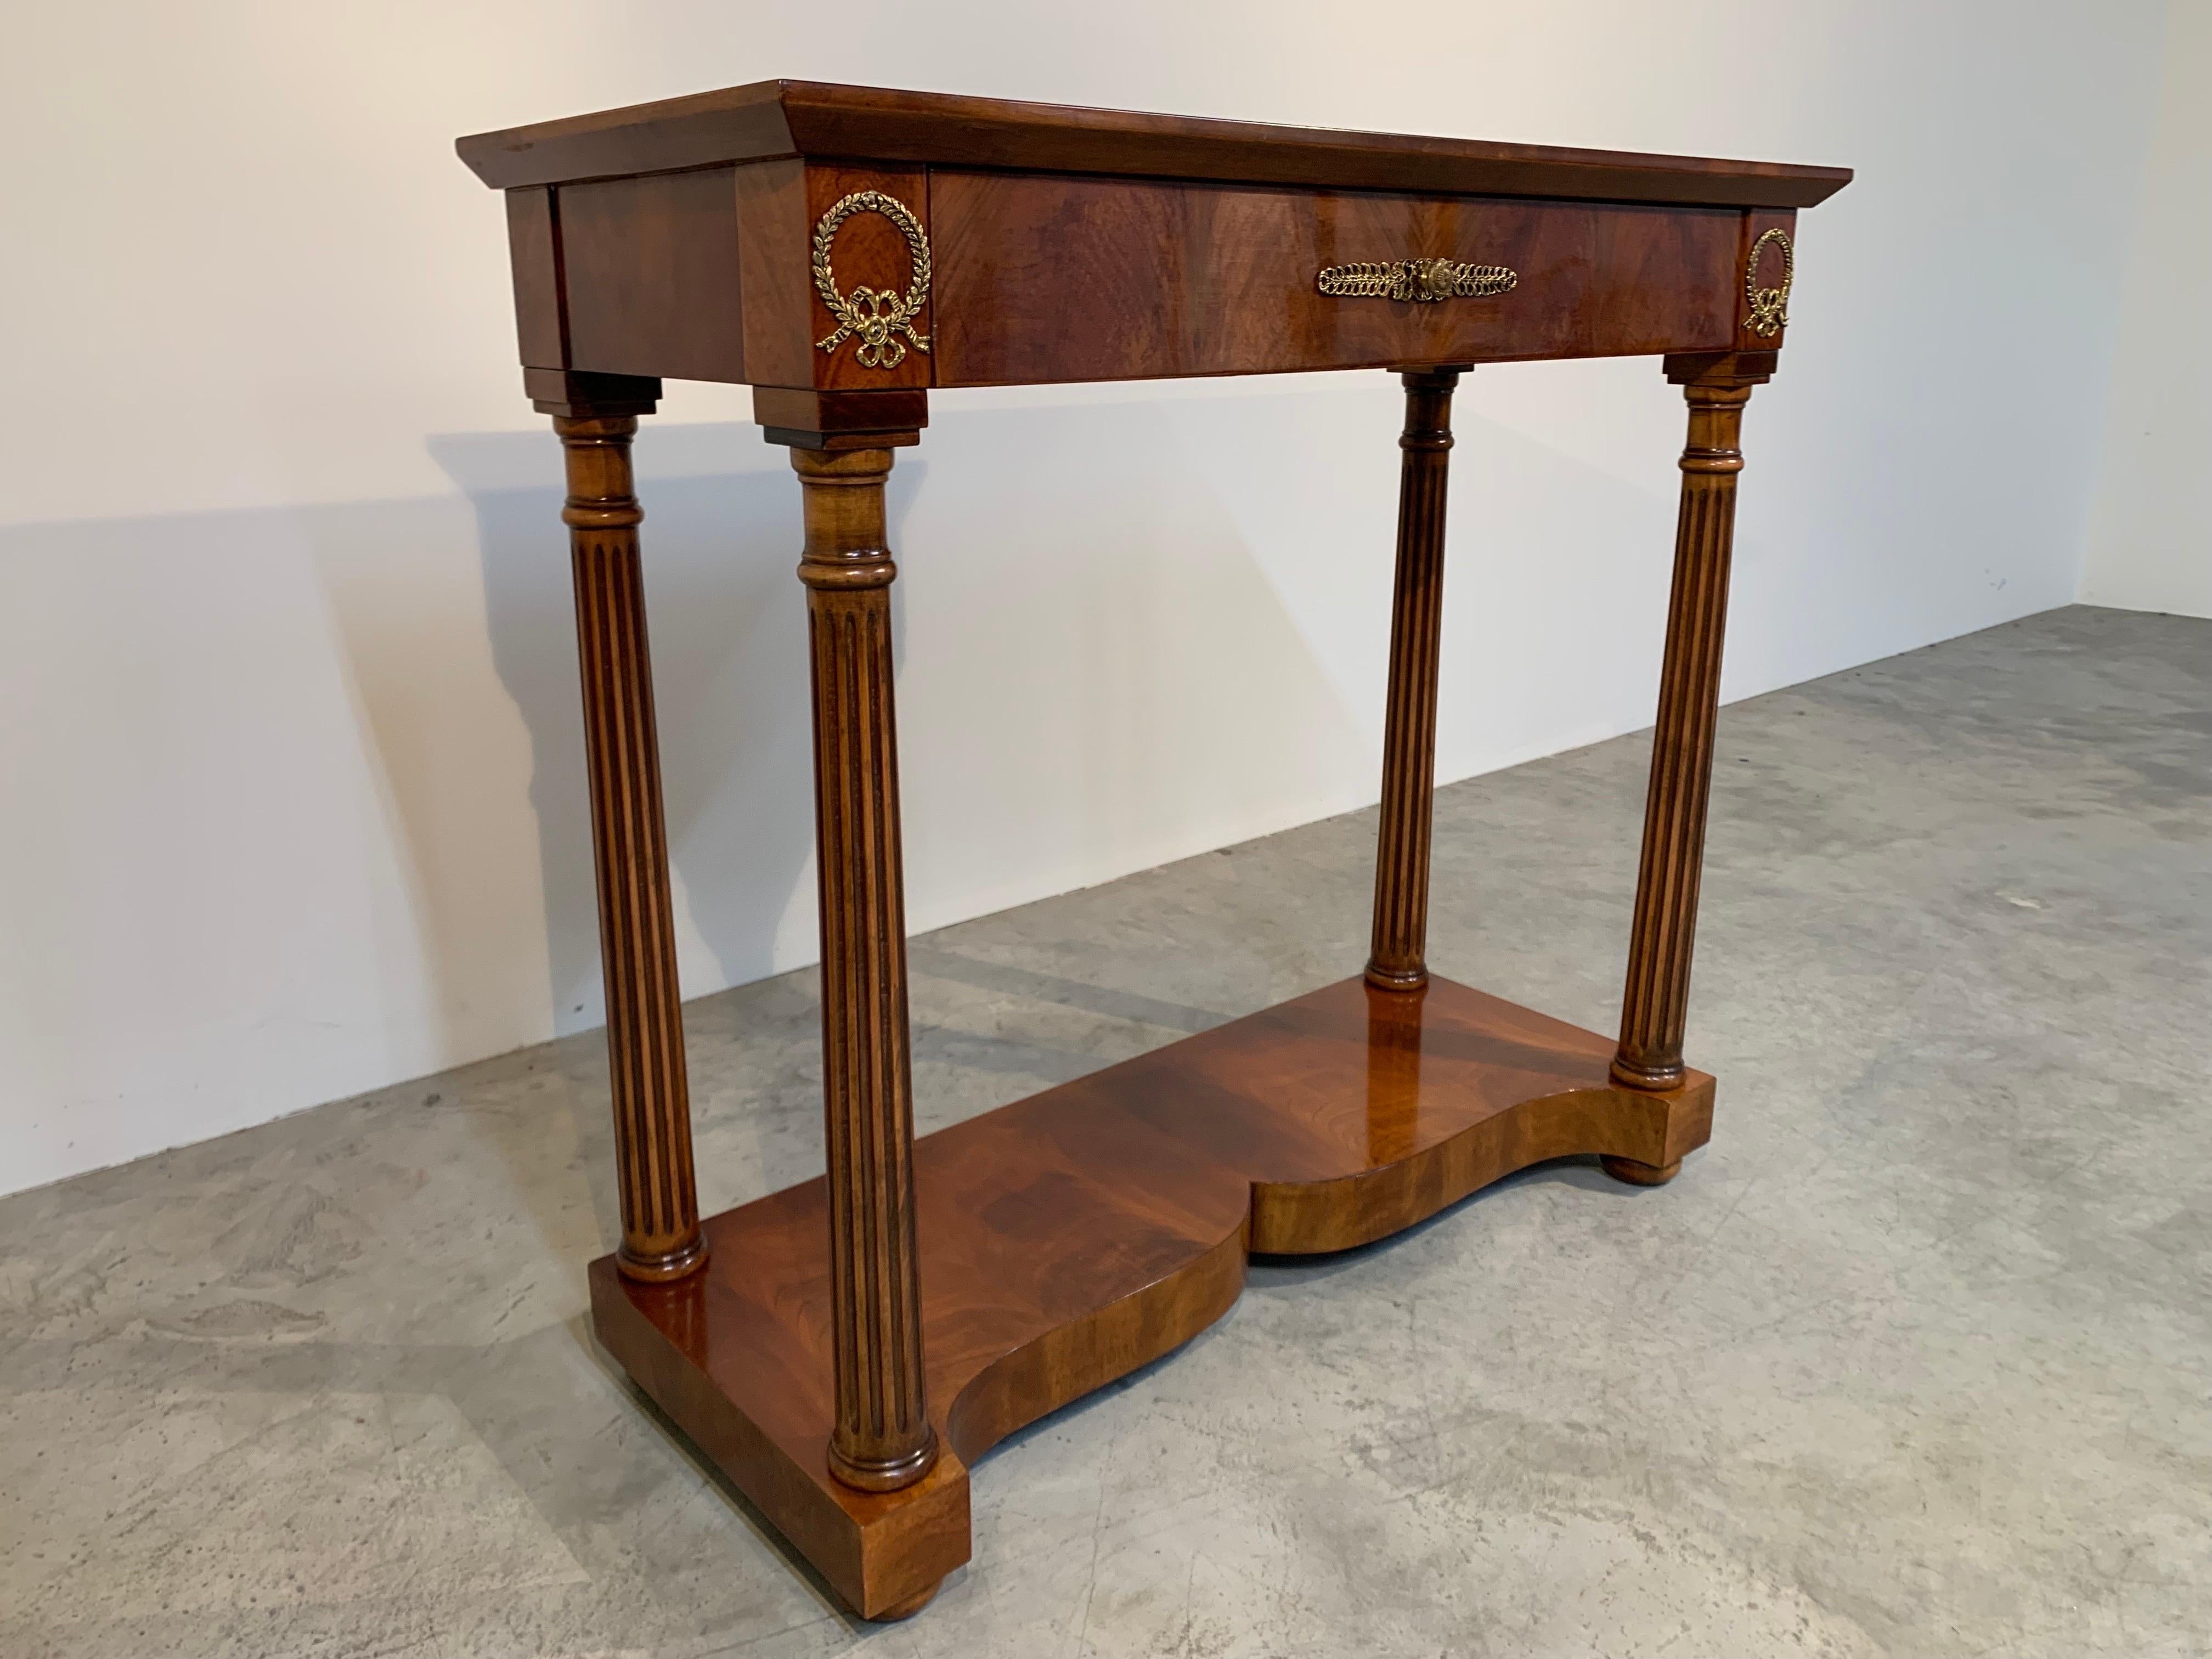 A beautiful mahogany console table having brass pulls and accents produced by marelli serafino
-Italy circa 2005. 
Solid, quality construction with sculpted lines and details. 
In outstanding condition.